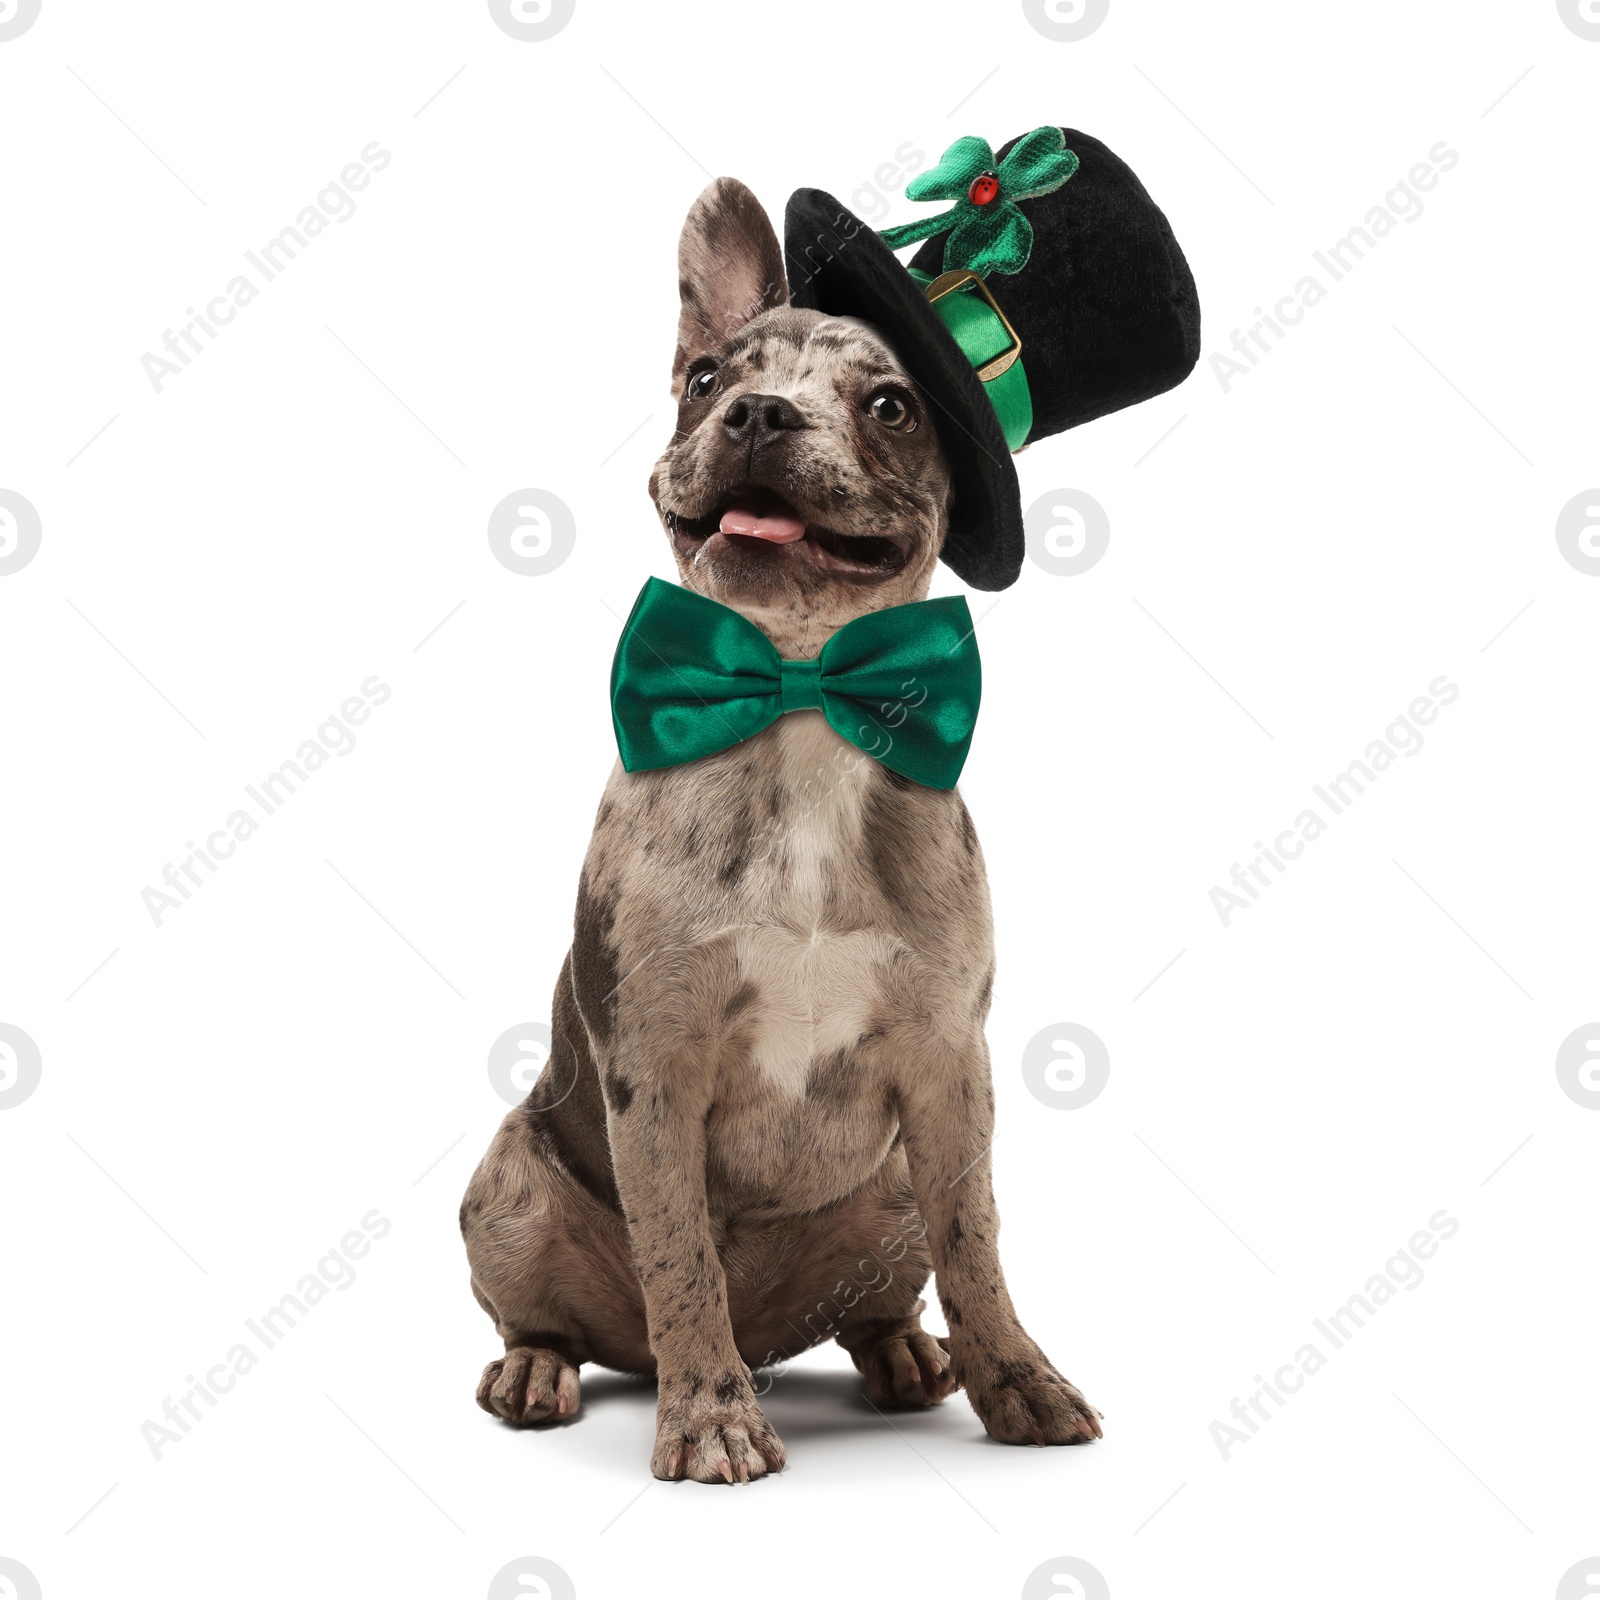 Image of St. Patrick's day celebration. Cute French bulldog with green bow tie and leprechaun hat isolated on white